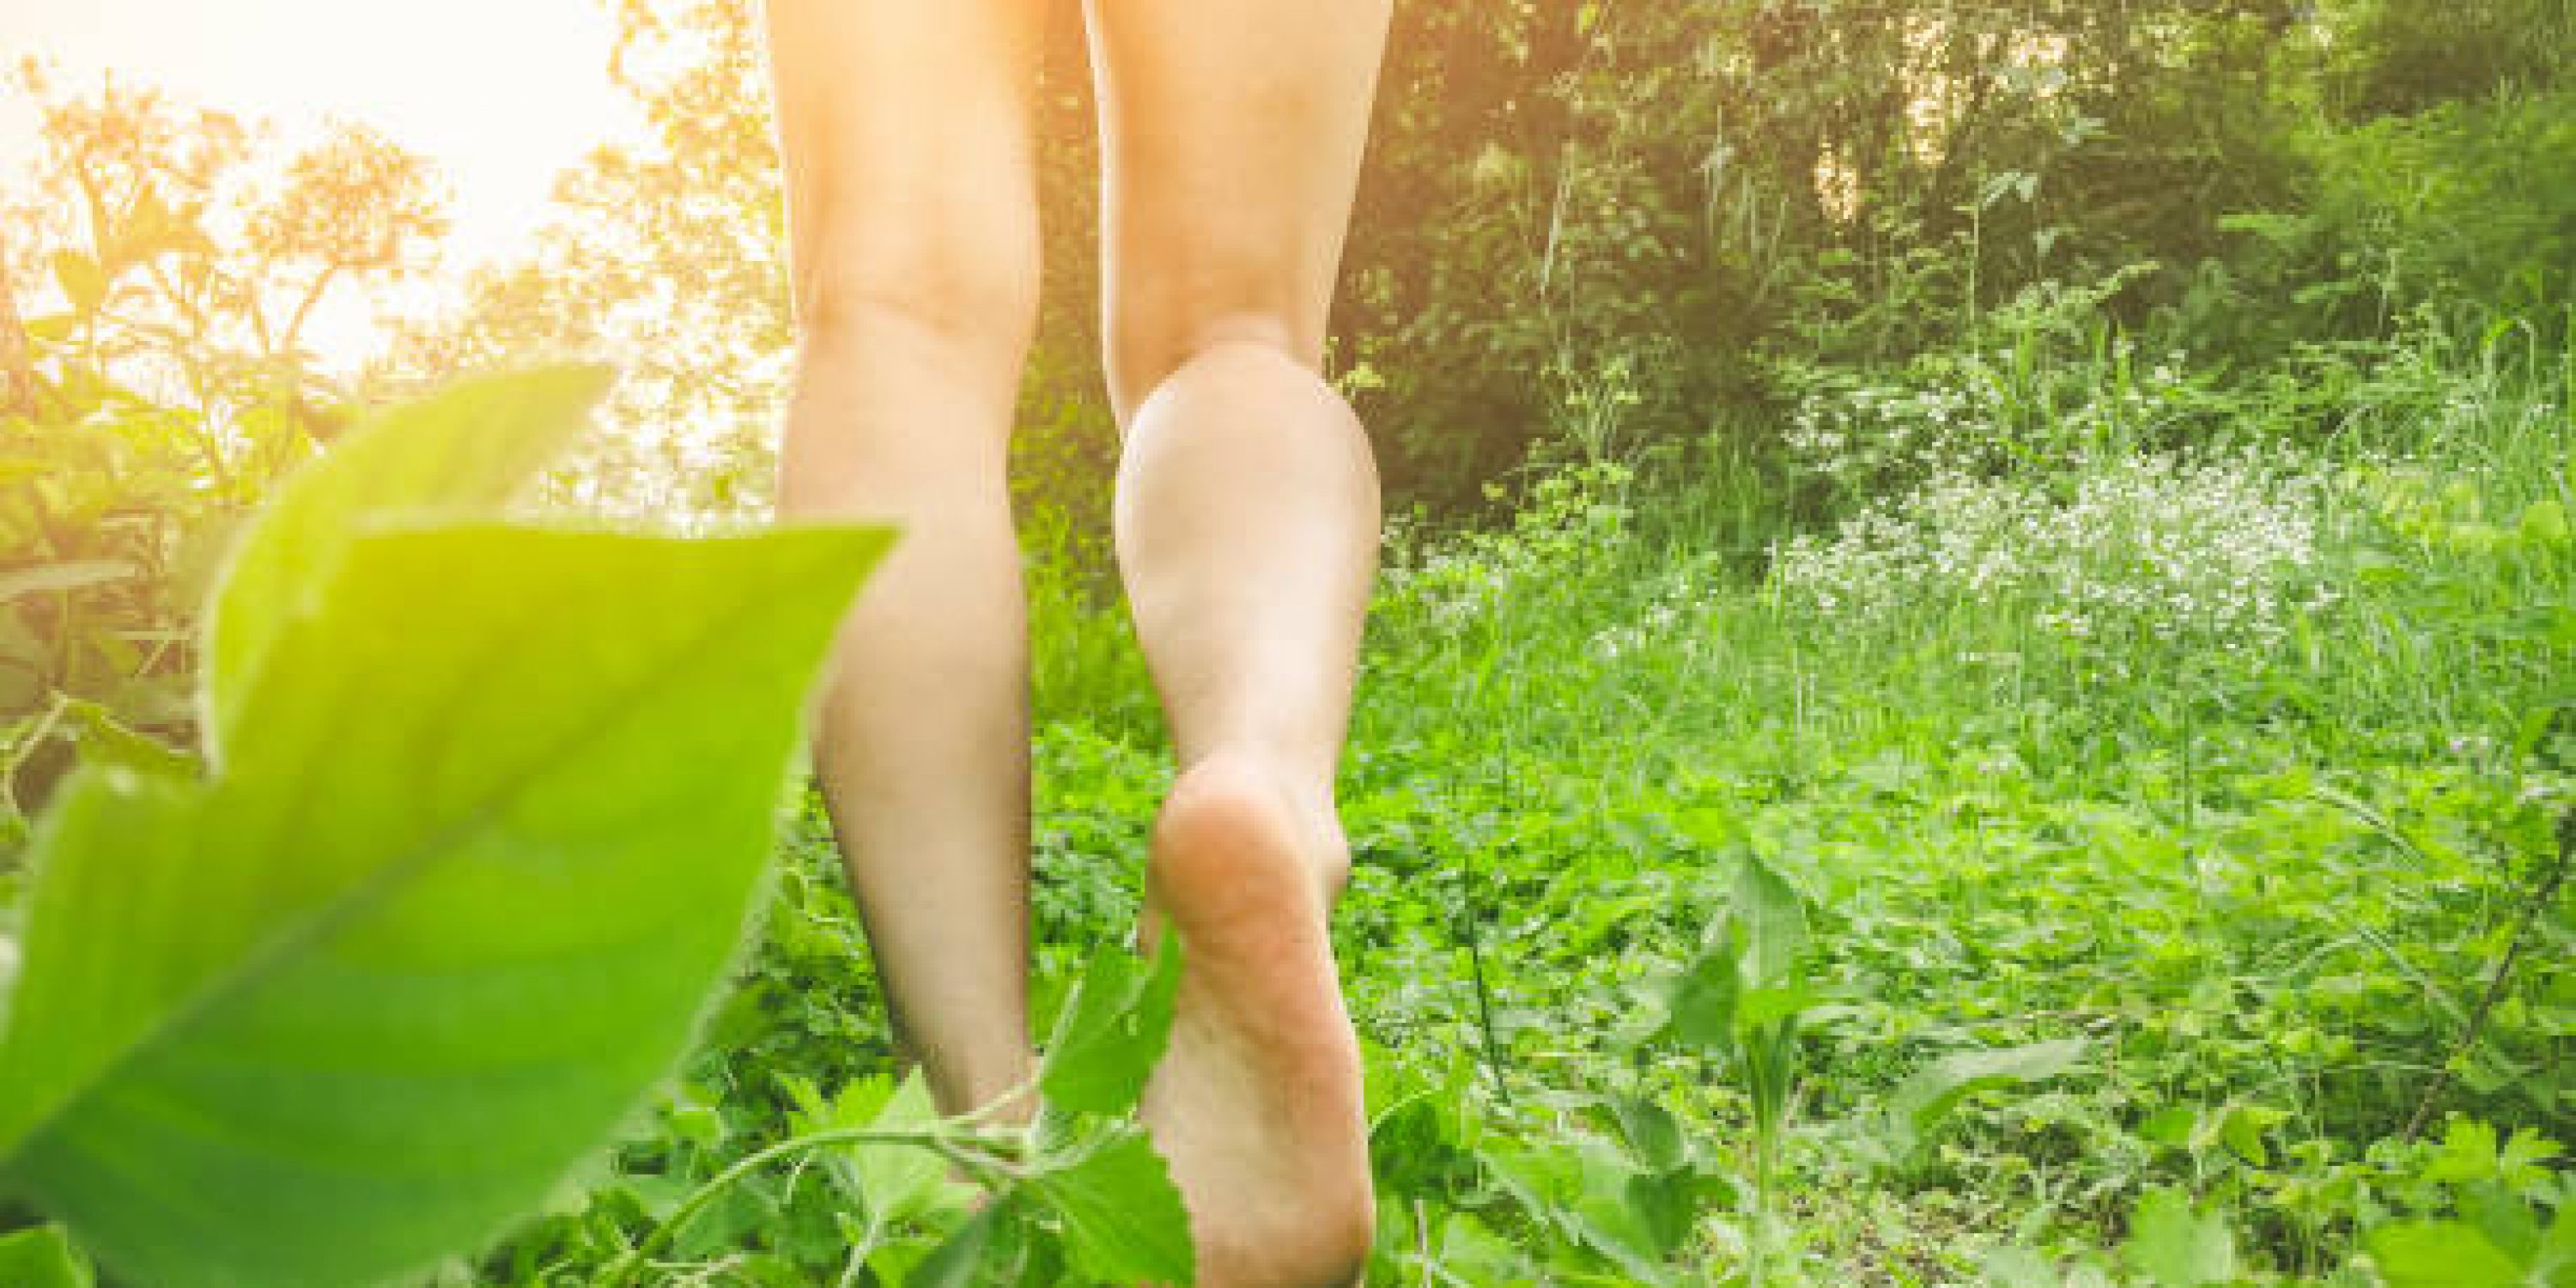 Close-up of young woman's legs. She walks barefoot on grass in meadow at morning in lush green nature.